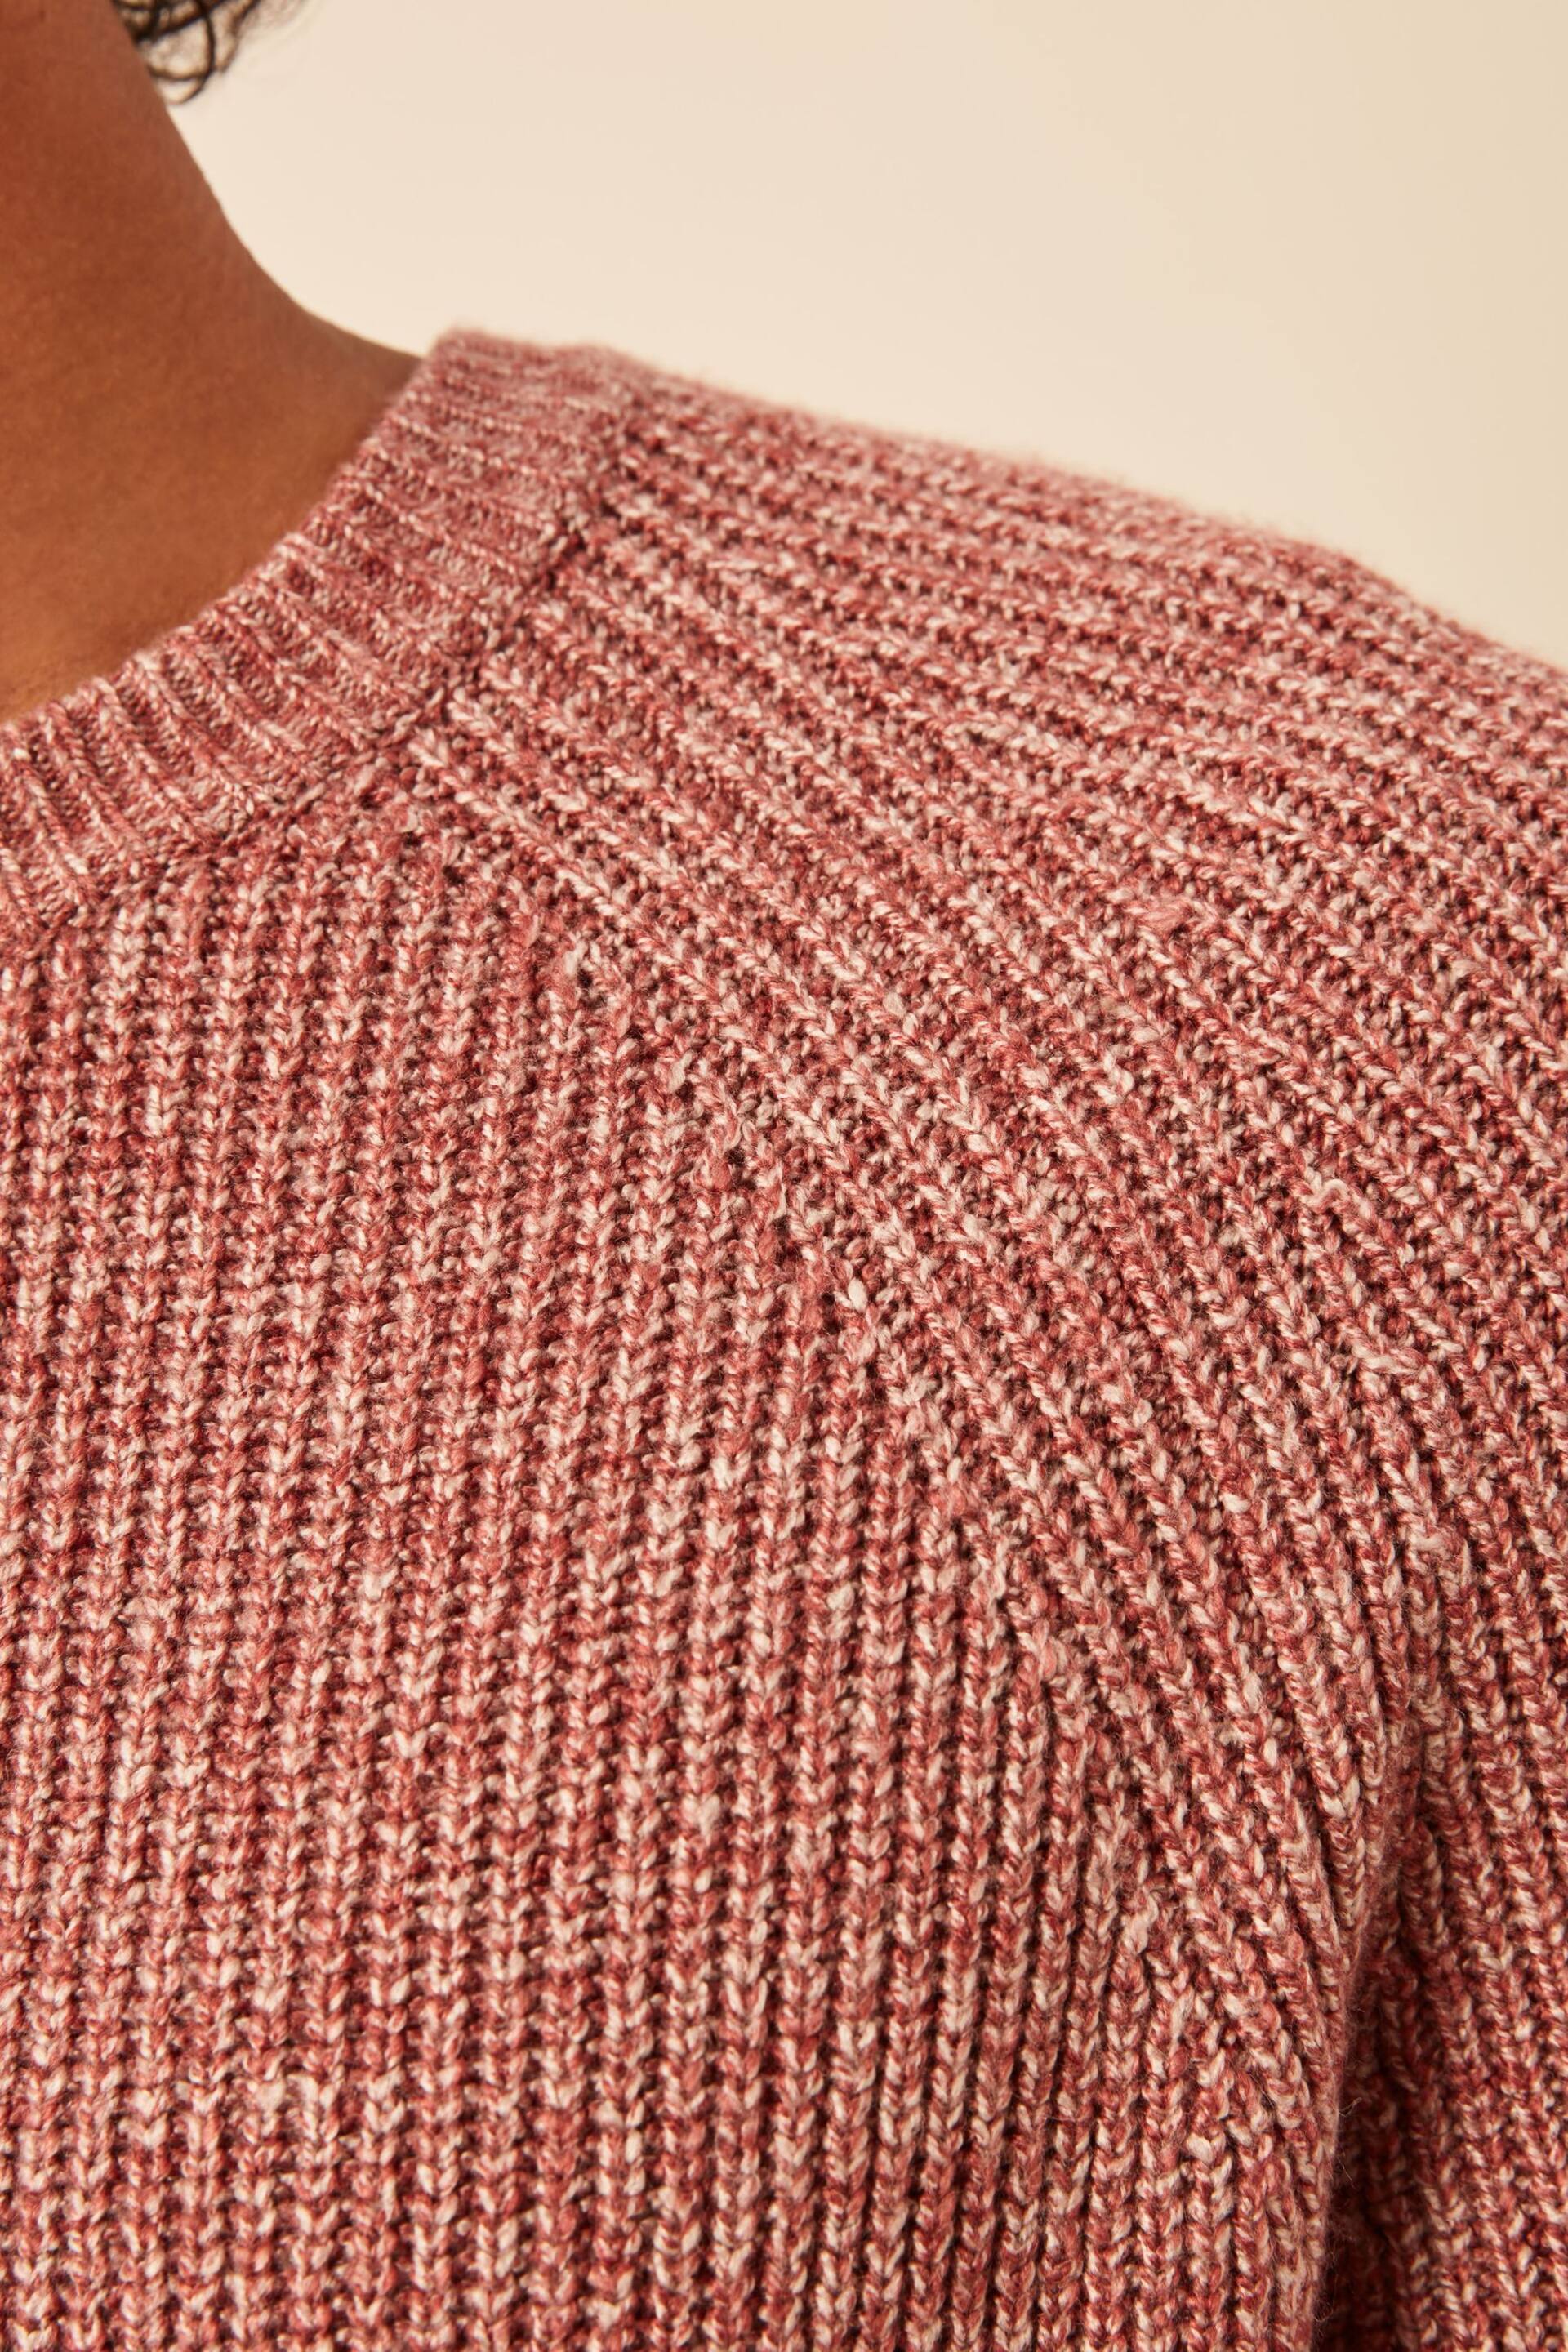 Red Regular Cosy Rib Knitted Jumper - Image 6 of 10